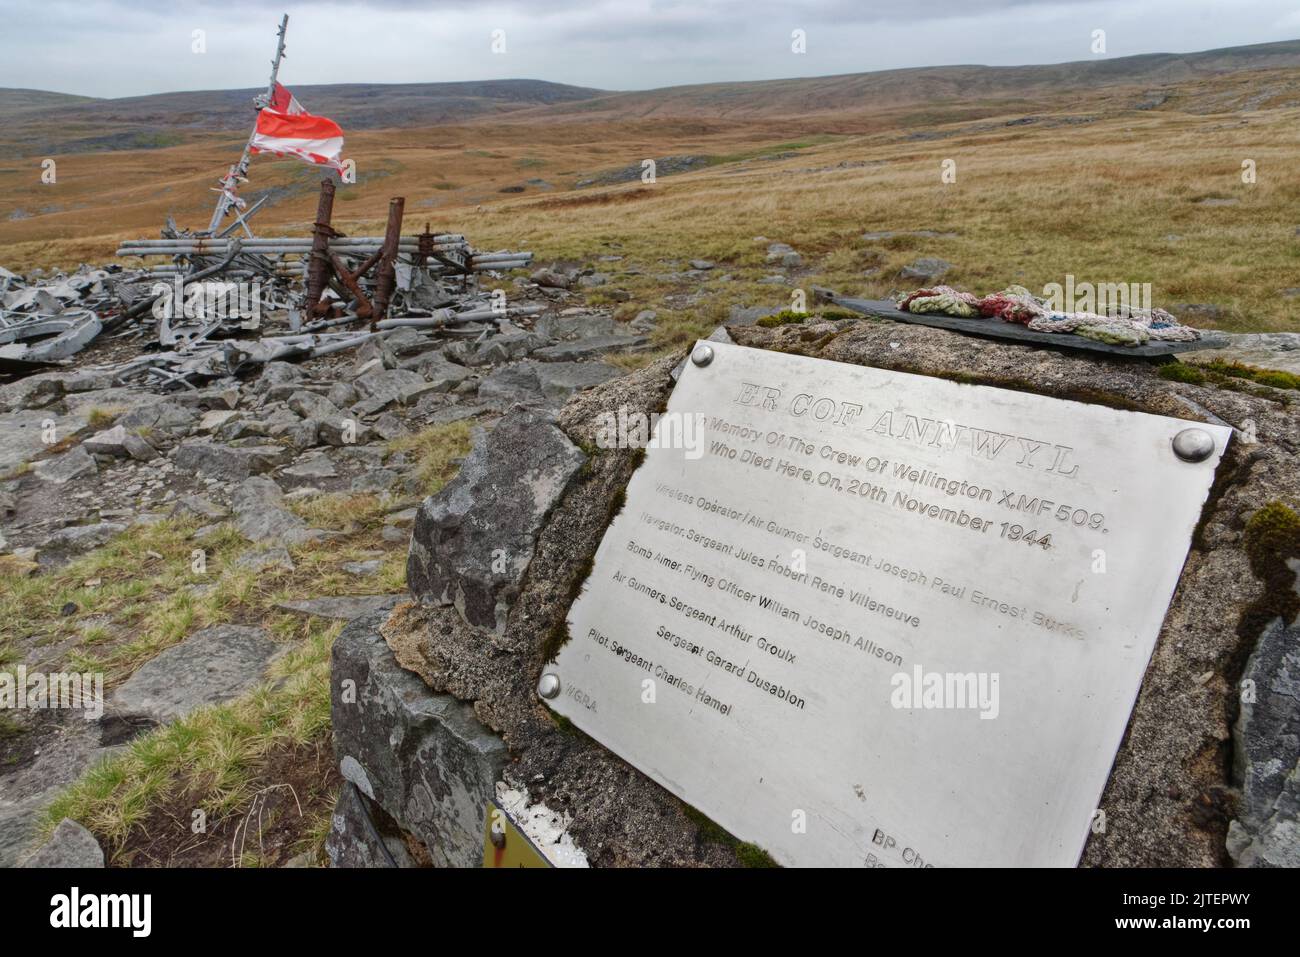 Memorial plaque and wreckage of Canadian Air Force WW II Wellington Bomber MF509 which crashed in 1944 at Carreg Coch, Brecon Beacons, Wales, UK, Oct Stock Photo